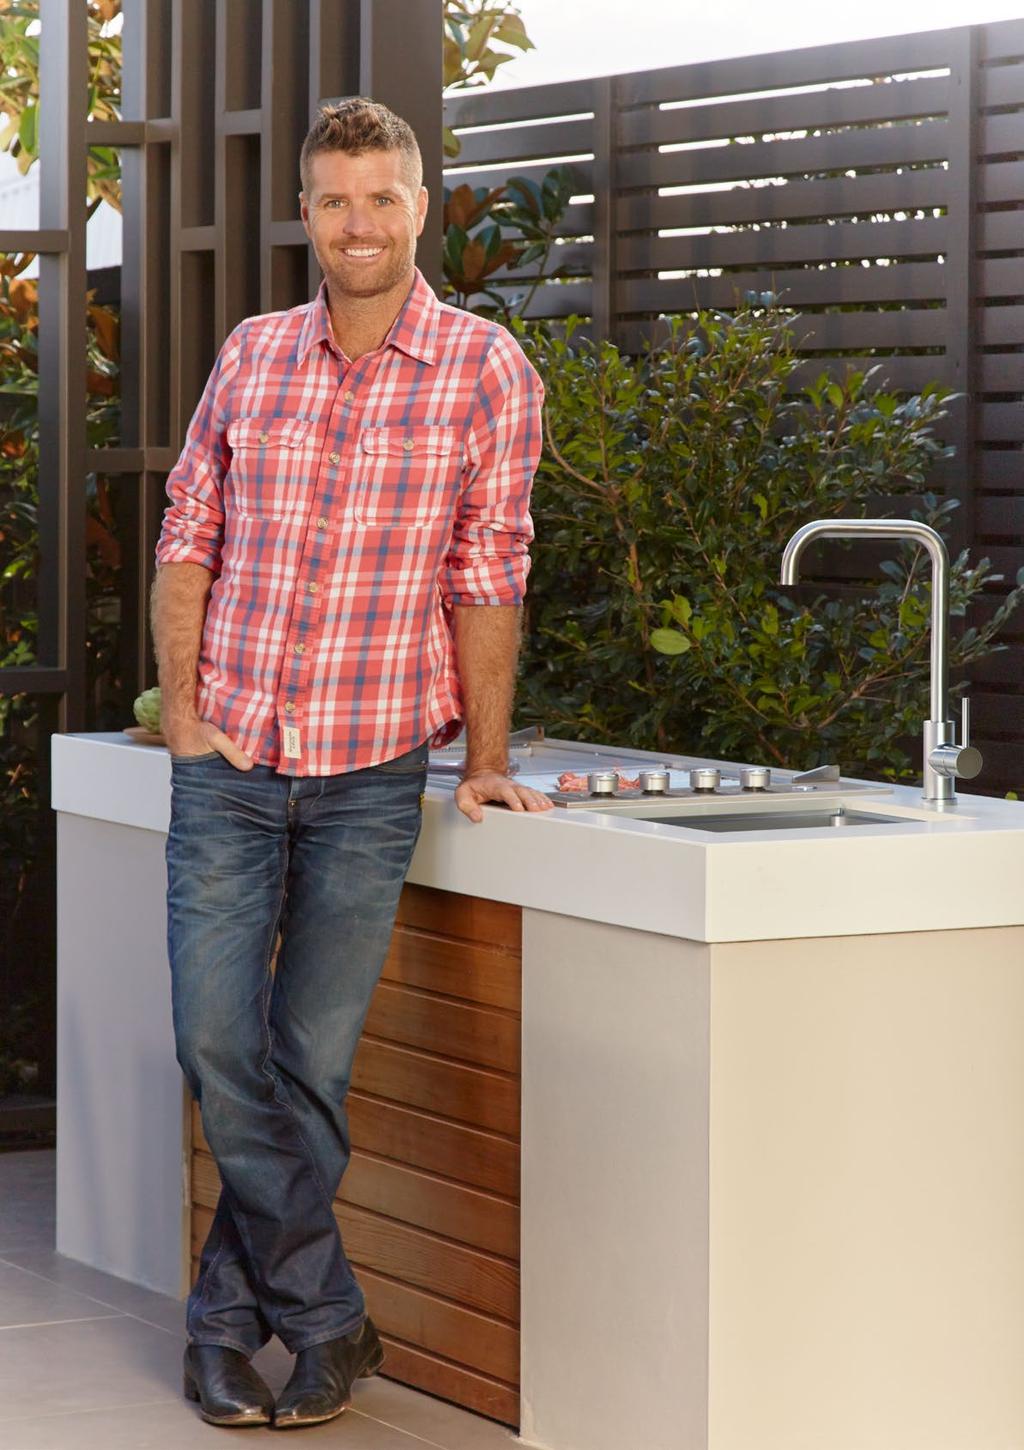 16 Clark Kitchen, Laundry and Entertaining LEGEND Products TH = tap Featured: hole, RHB = Pete Right Evans